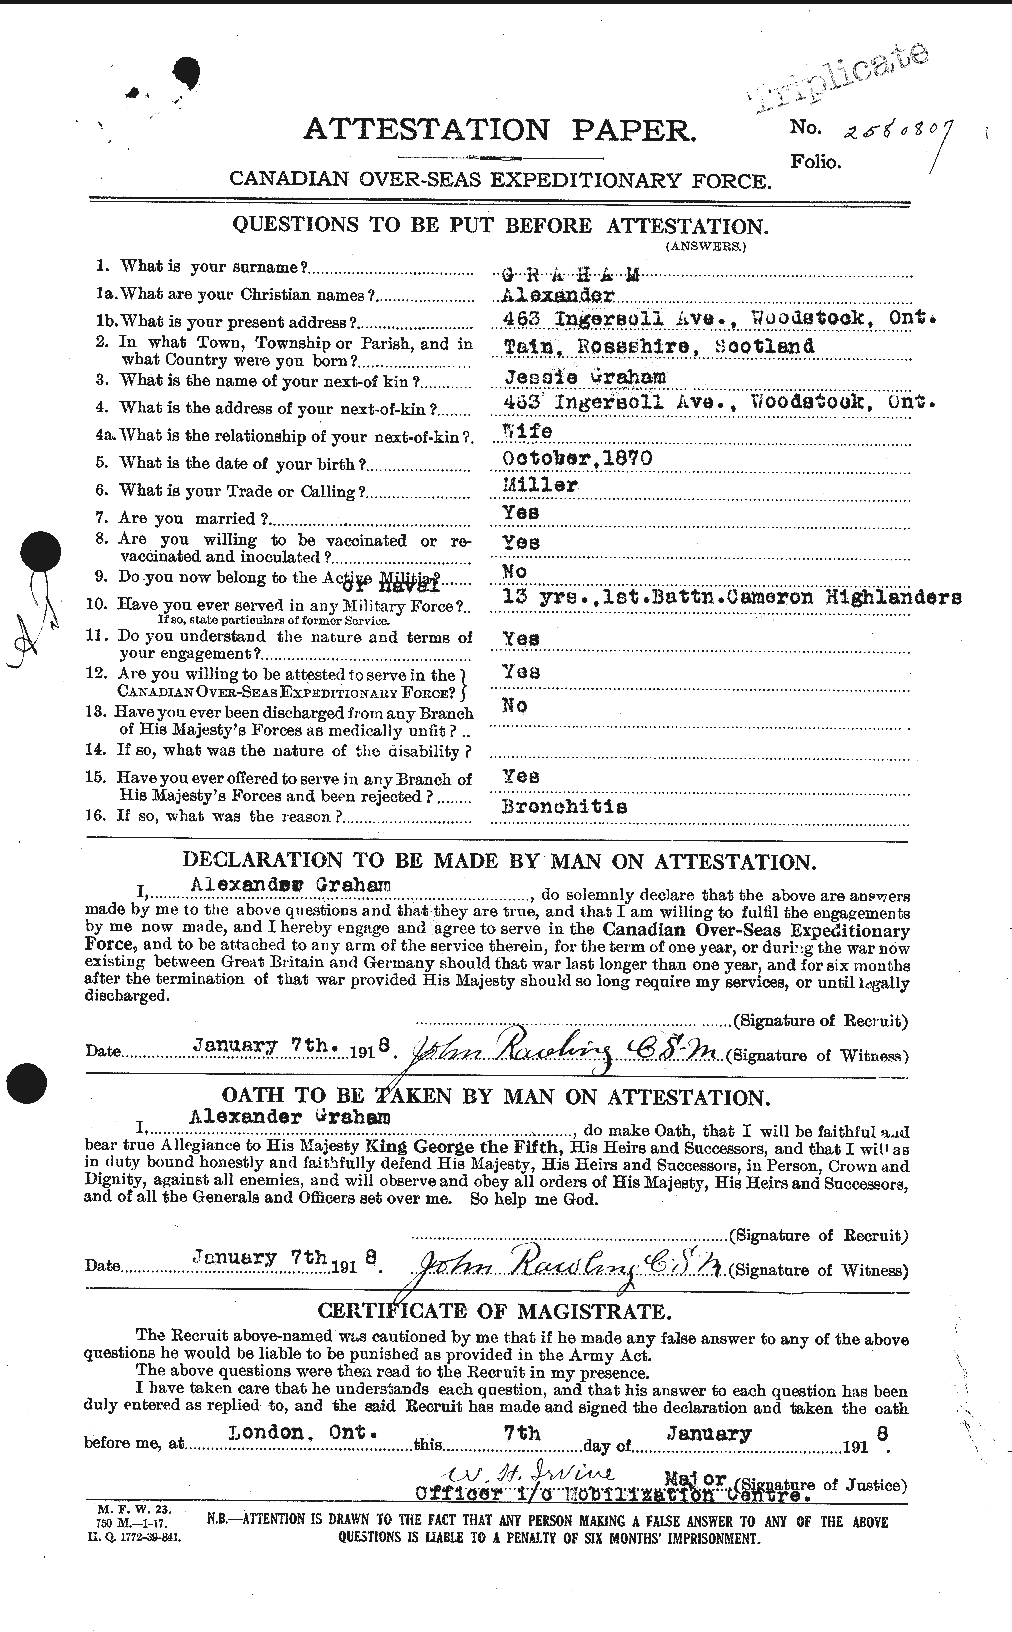 Personnel Records of the First World War - CEF 359587a